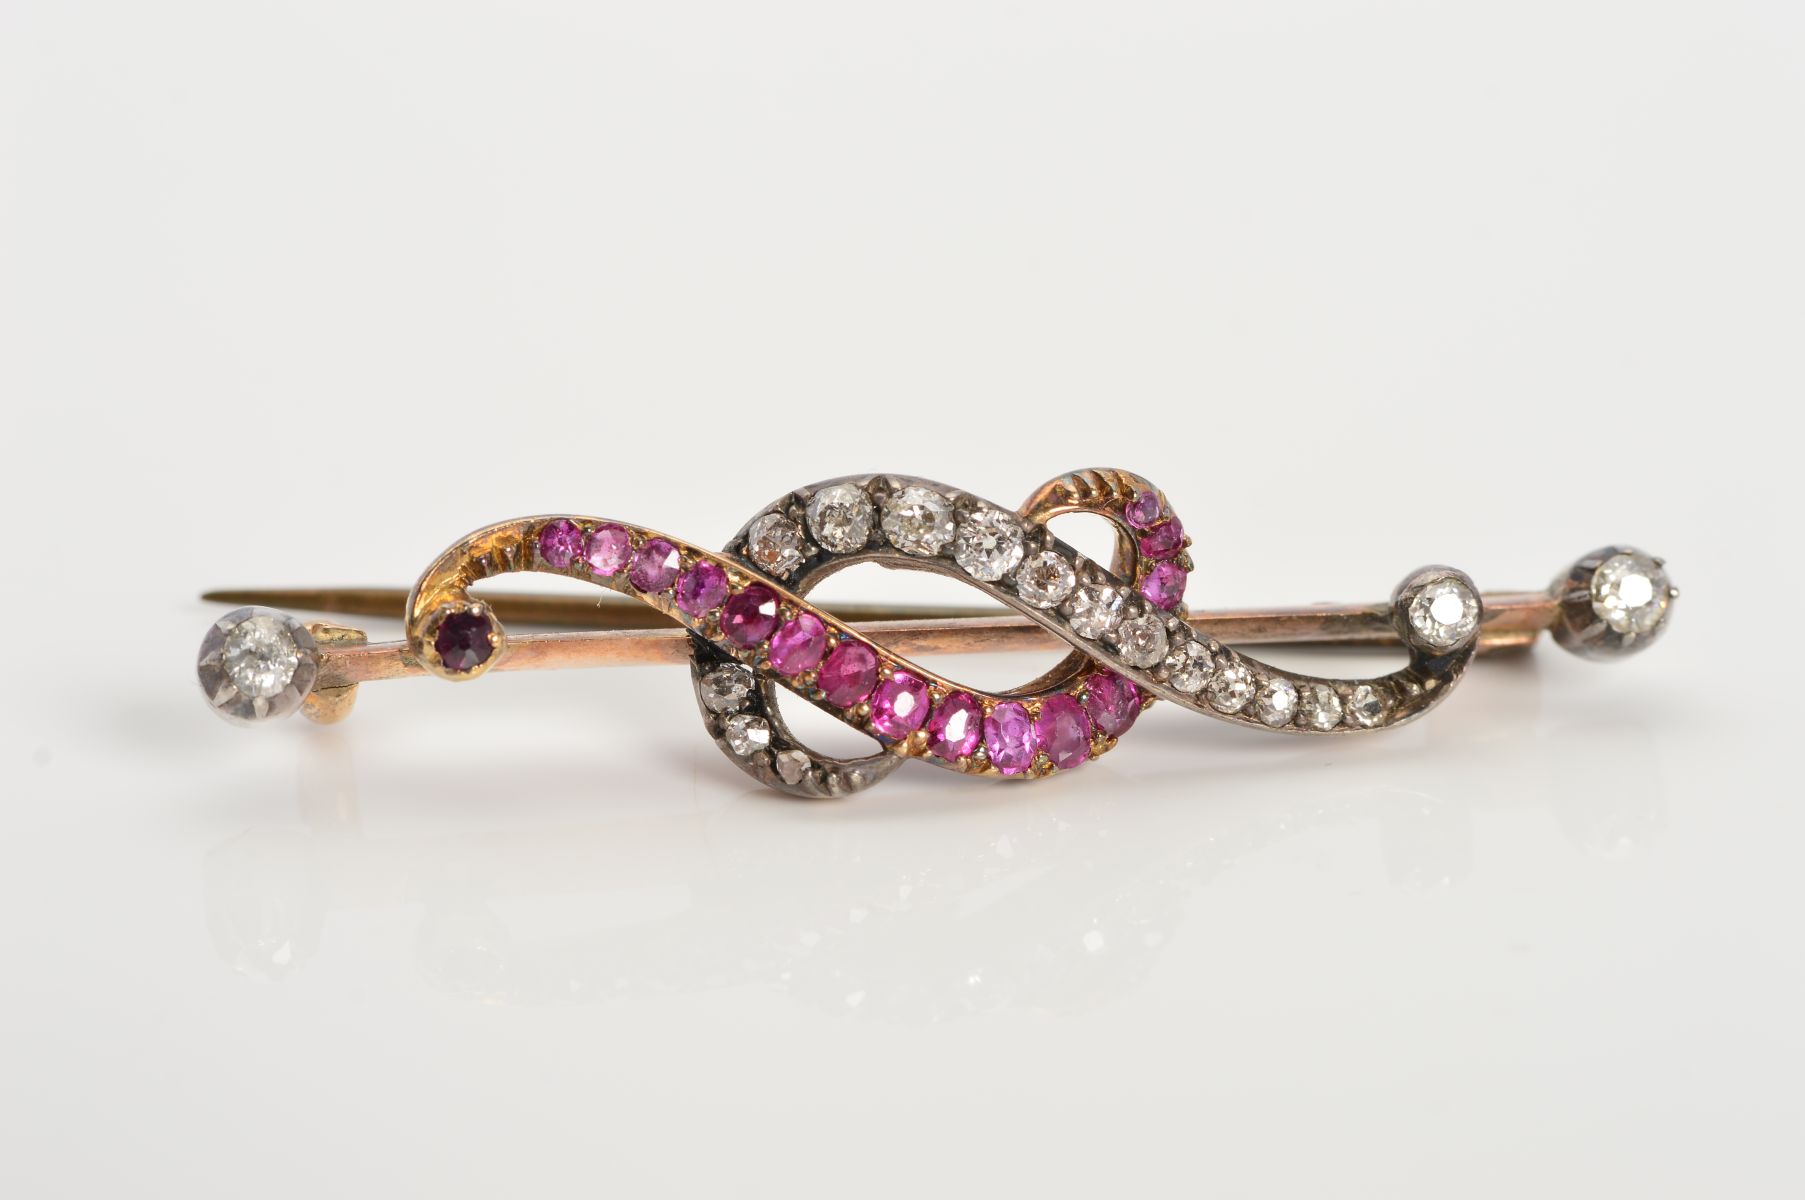 AN EARLY 20TH CENTURY RUBY AND DIAMOND BAR BROOCH, designed as two over lapping curved lines, one